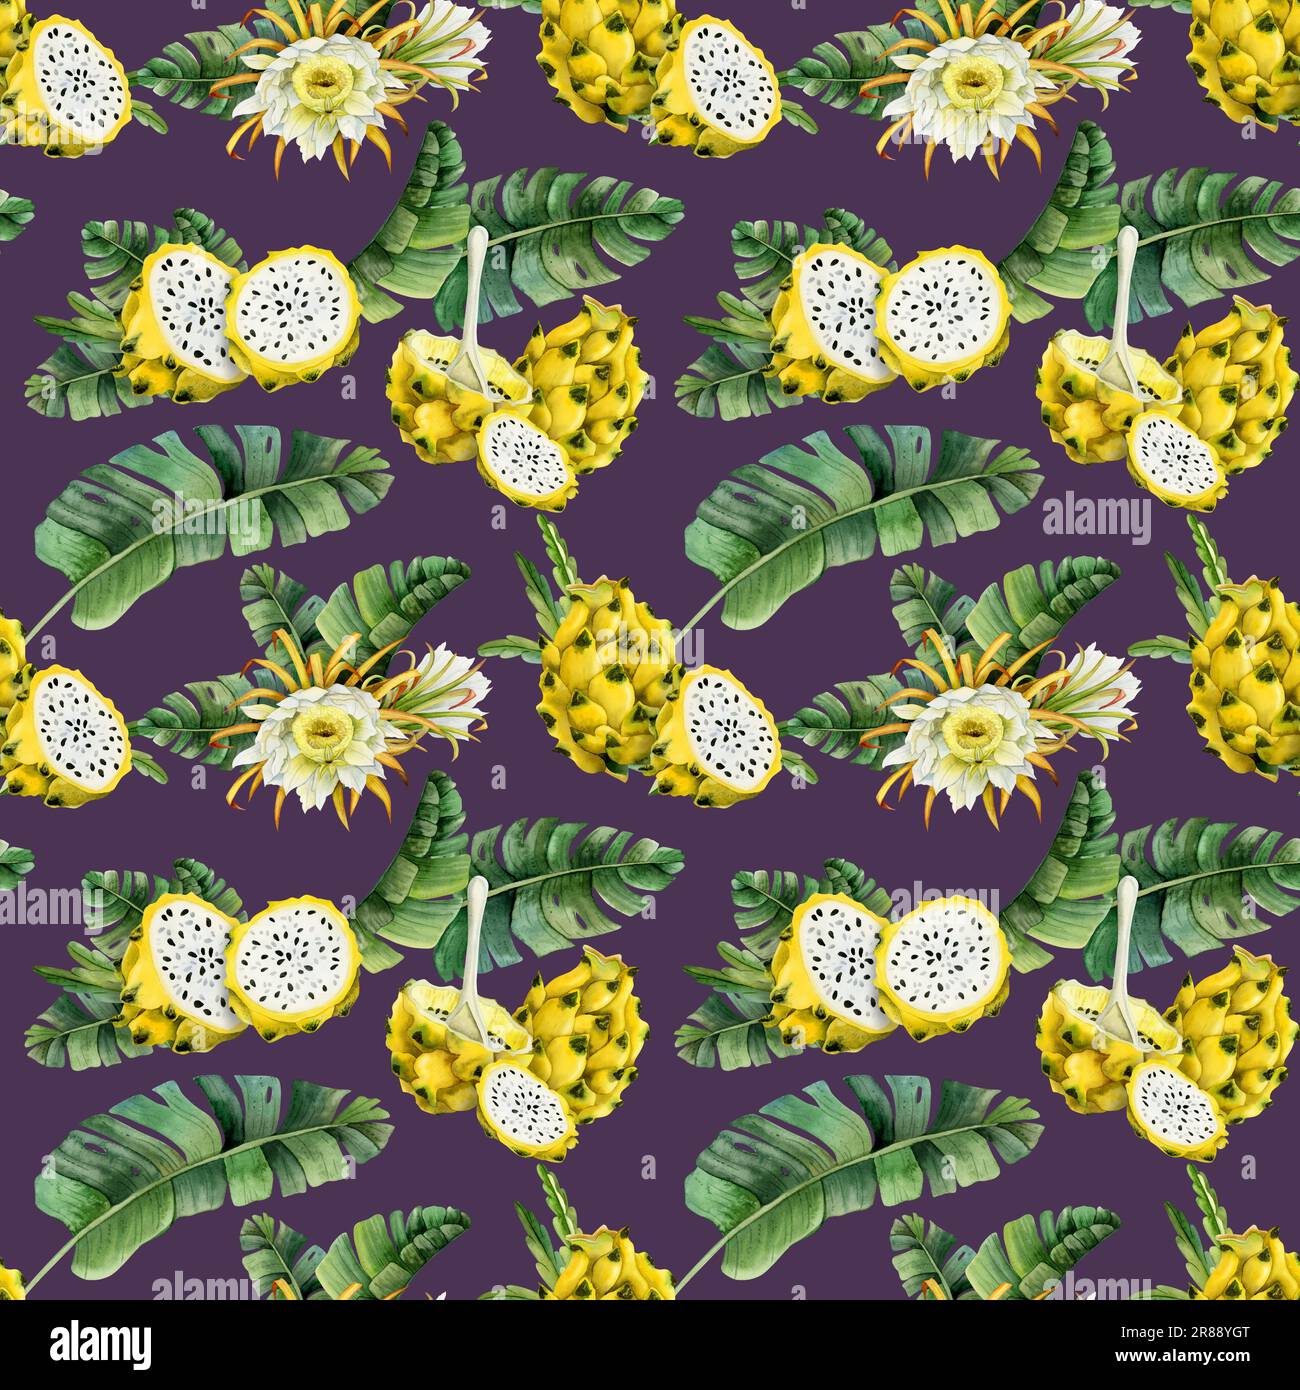 Daek purple yellow pitaya dragon fruits slices in tropical leaves watercolor seamless pattern on violet background Stock Photo